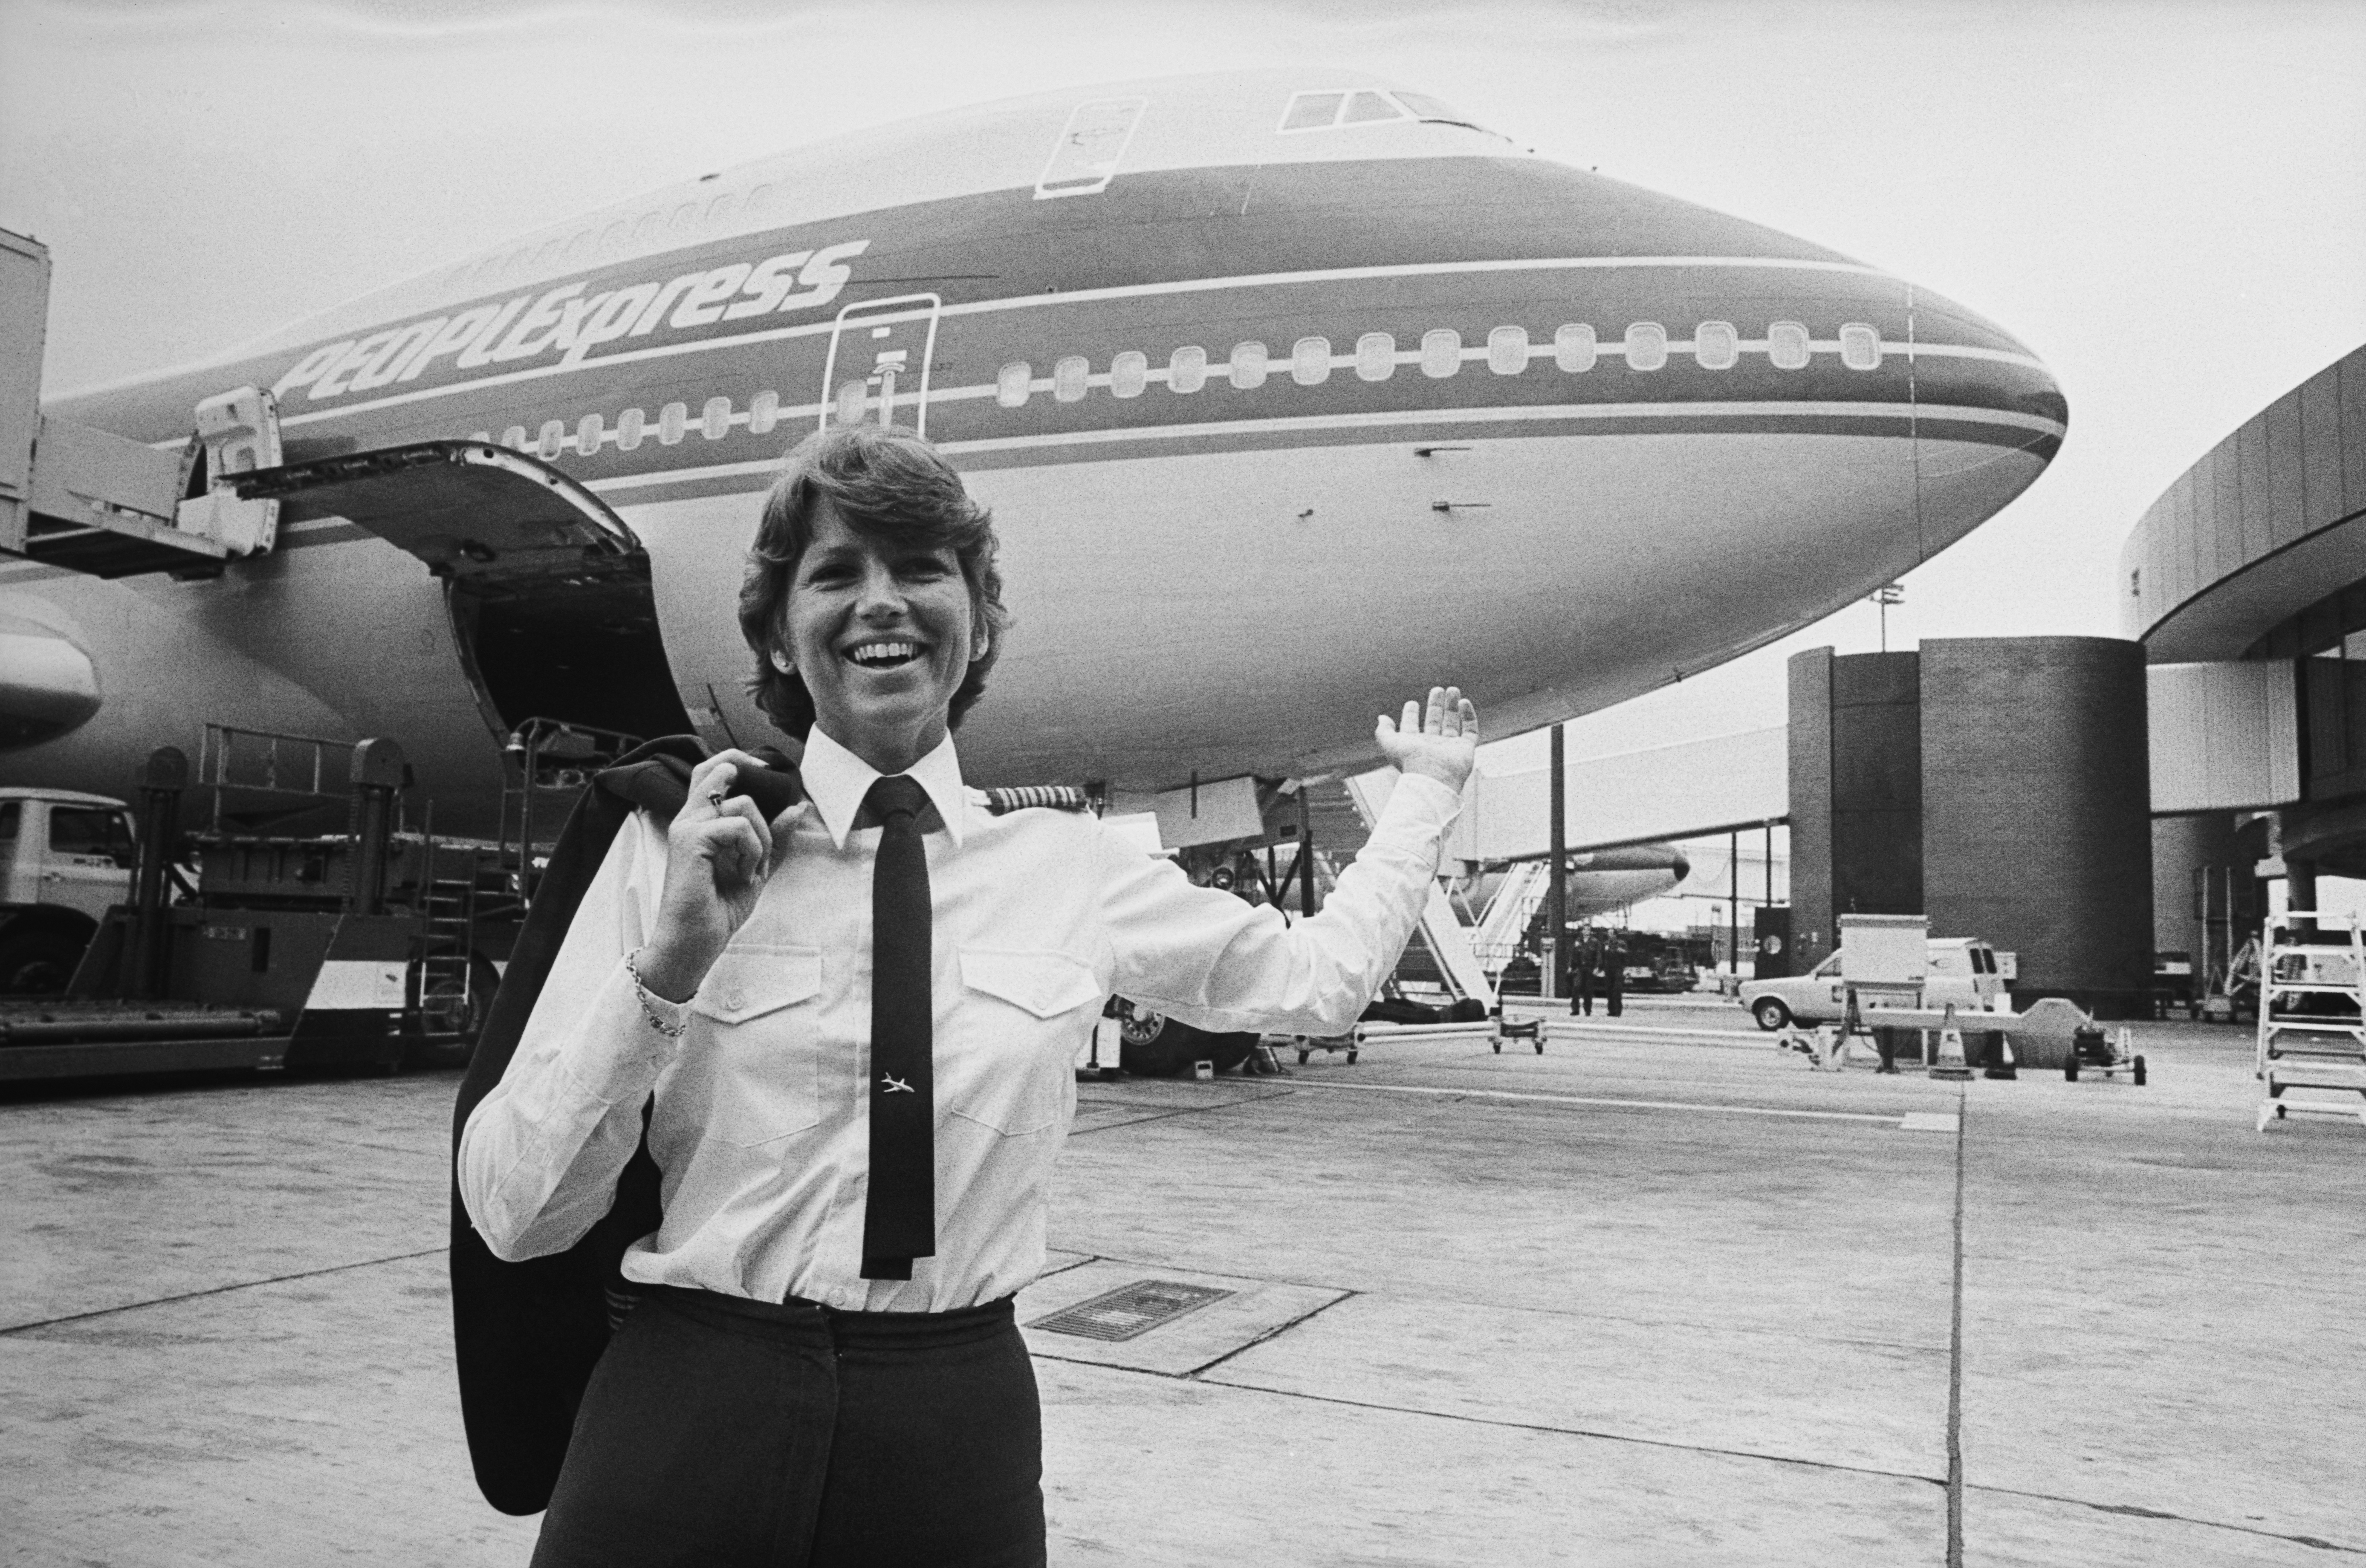 American pilot Captain Lynn Rippelmeyer, the first woman to captain a Boeing 747 across the Atlantic Ocean, stands before a PEOPLExpress aircraft, 20th July 1984. Image: P. Shirley / Daily Express / Hulton Archive / Getty Images